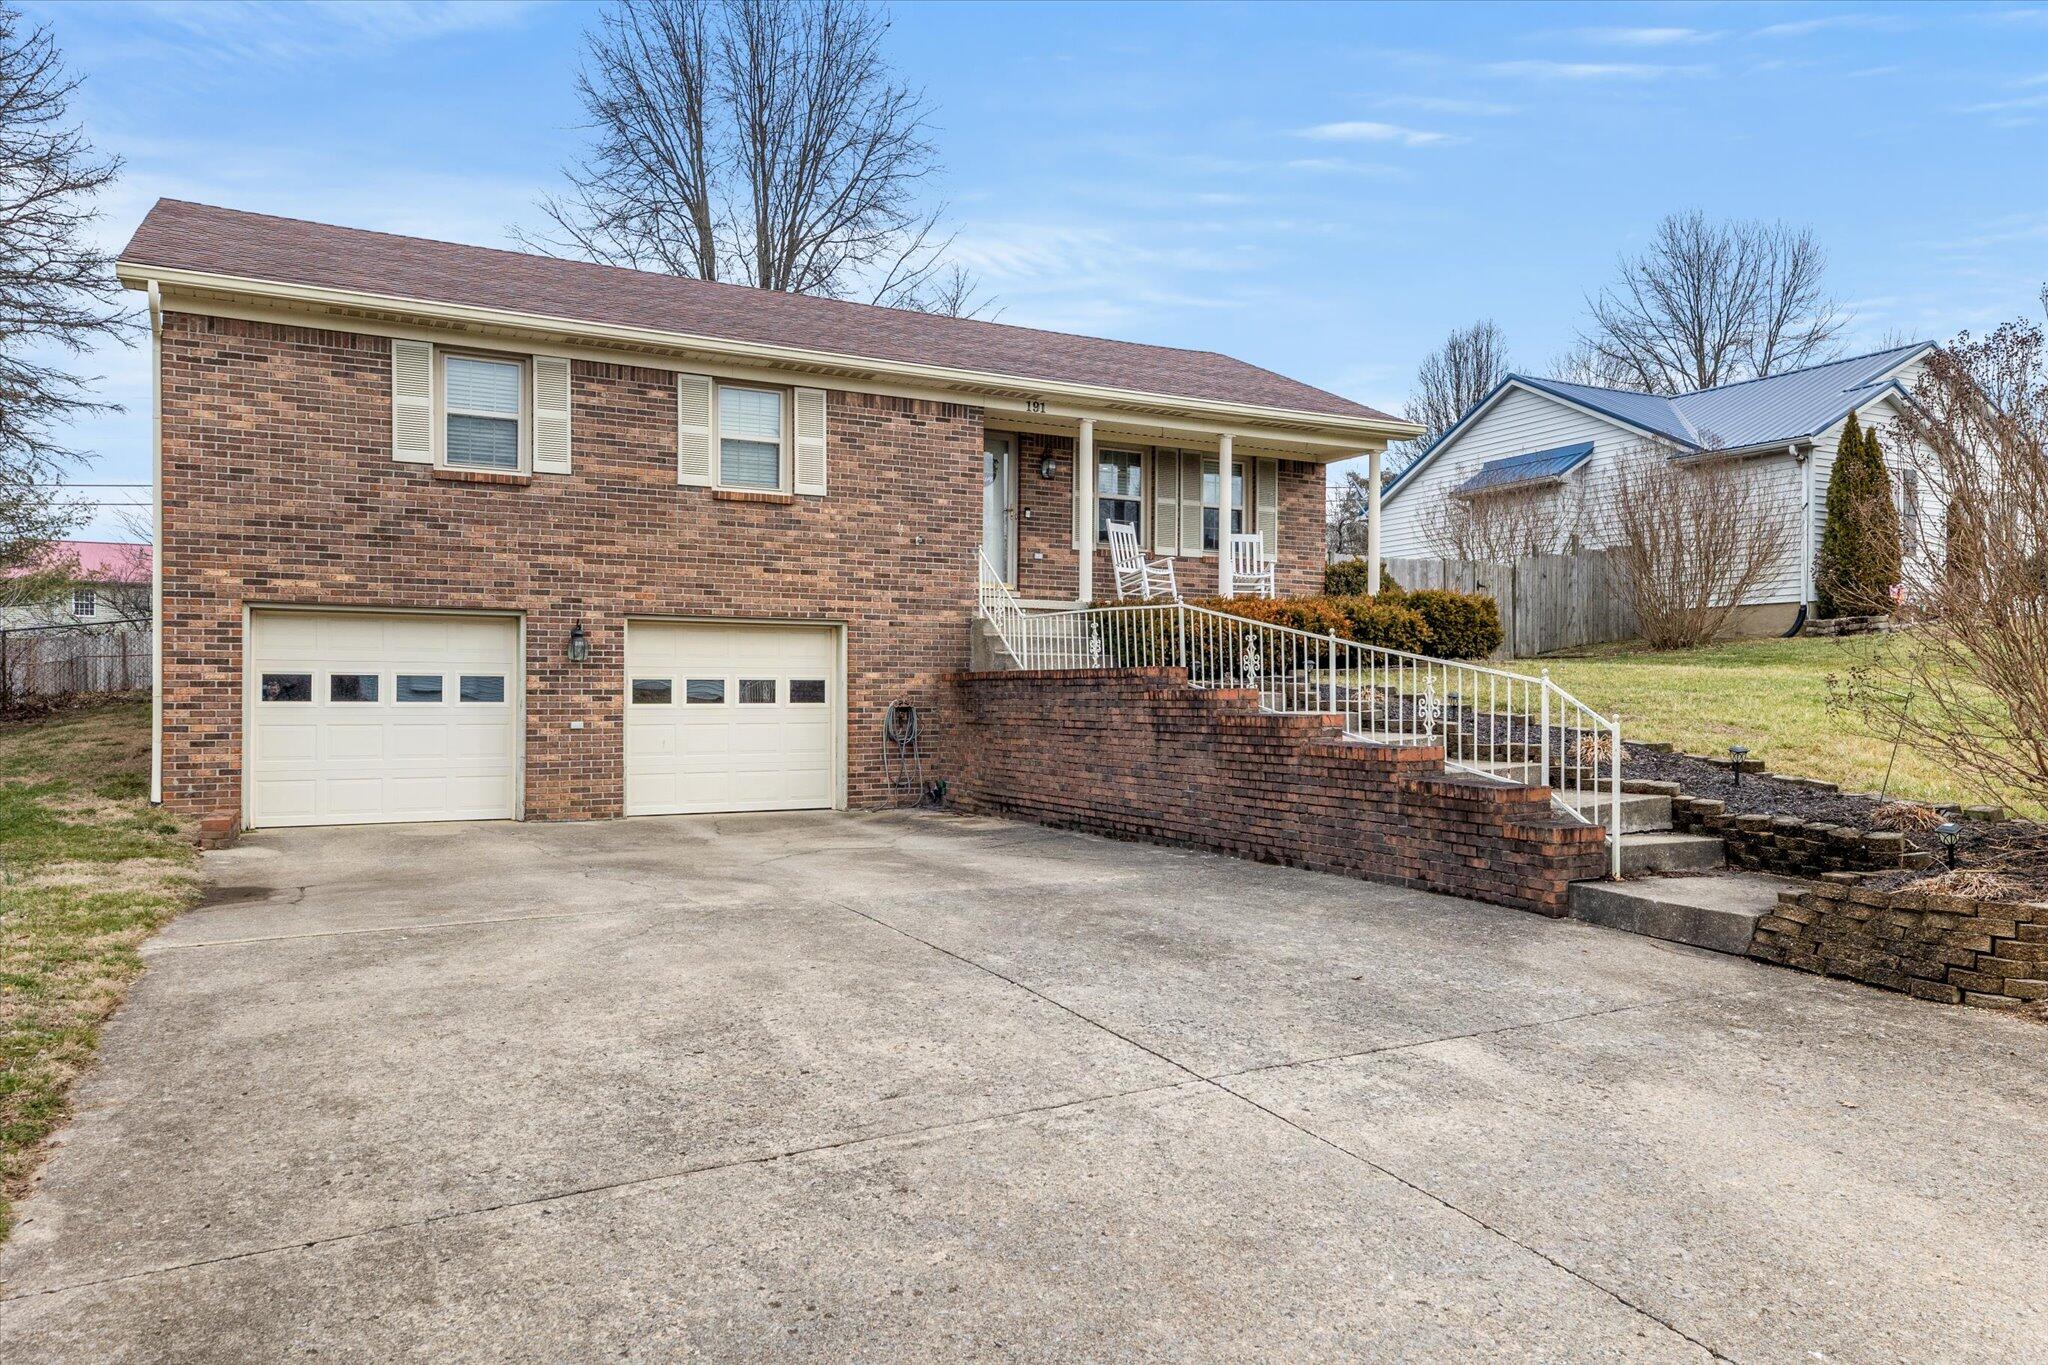 191 Candlewood Drive, Danville, KY 40422 - MLS#: 23002012